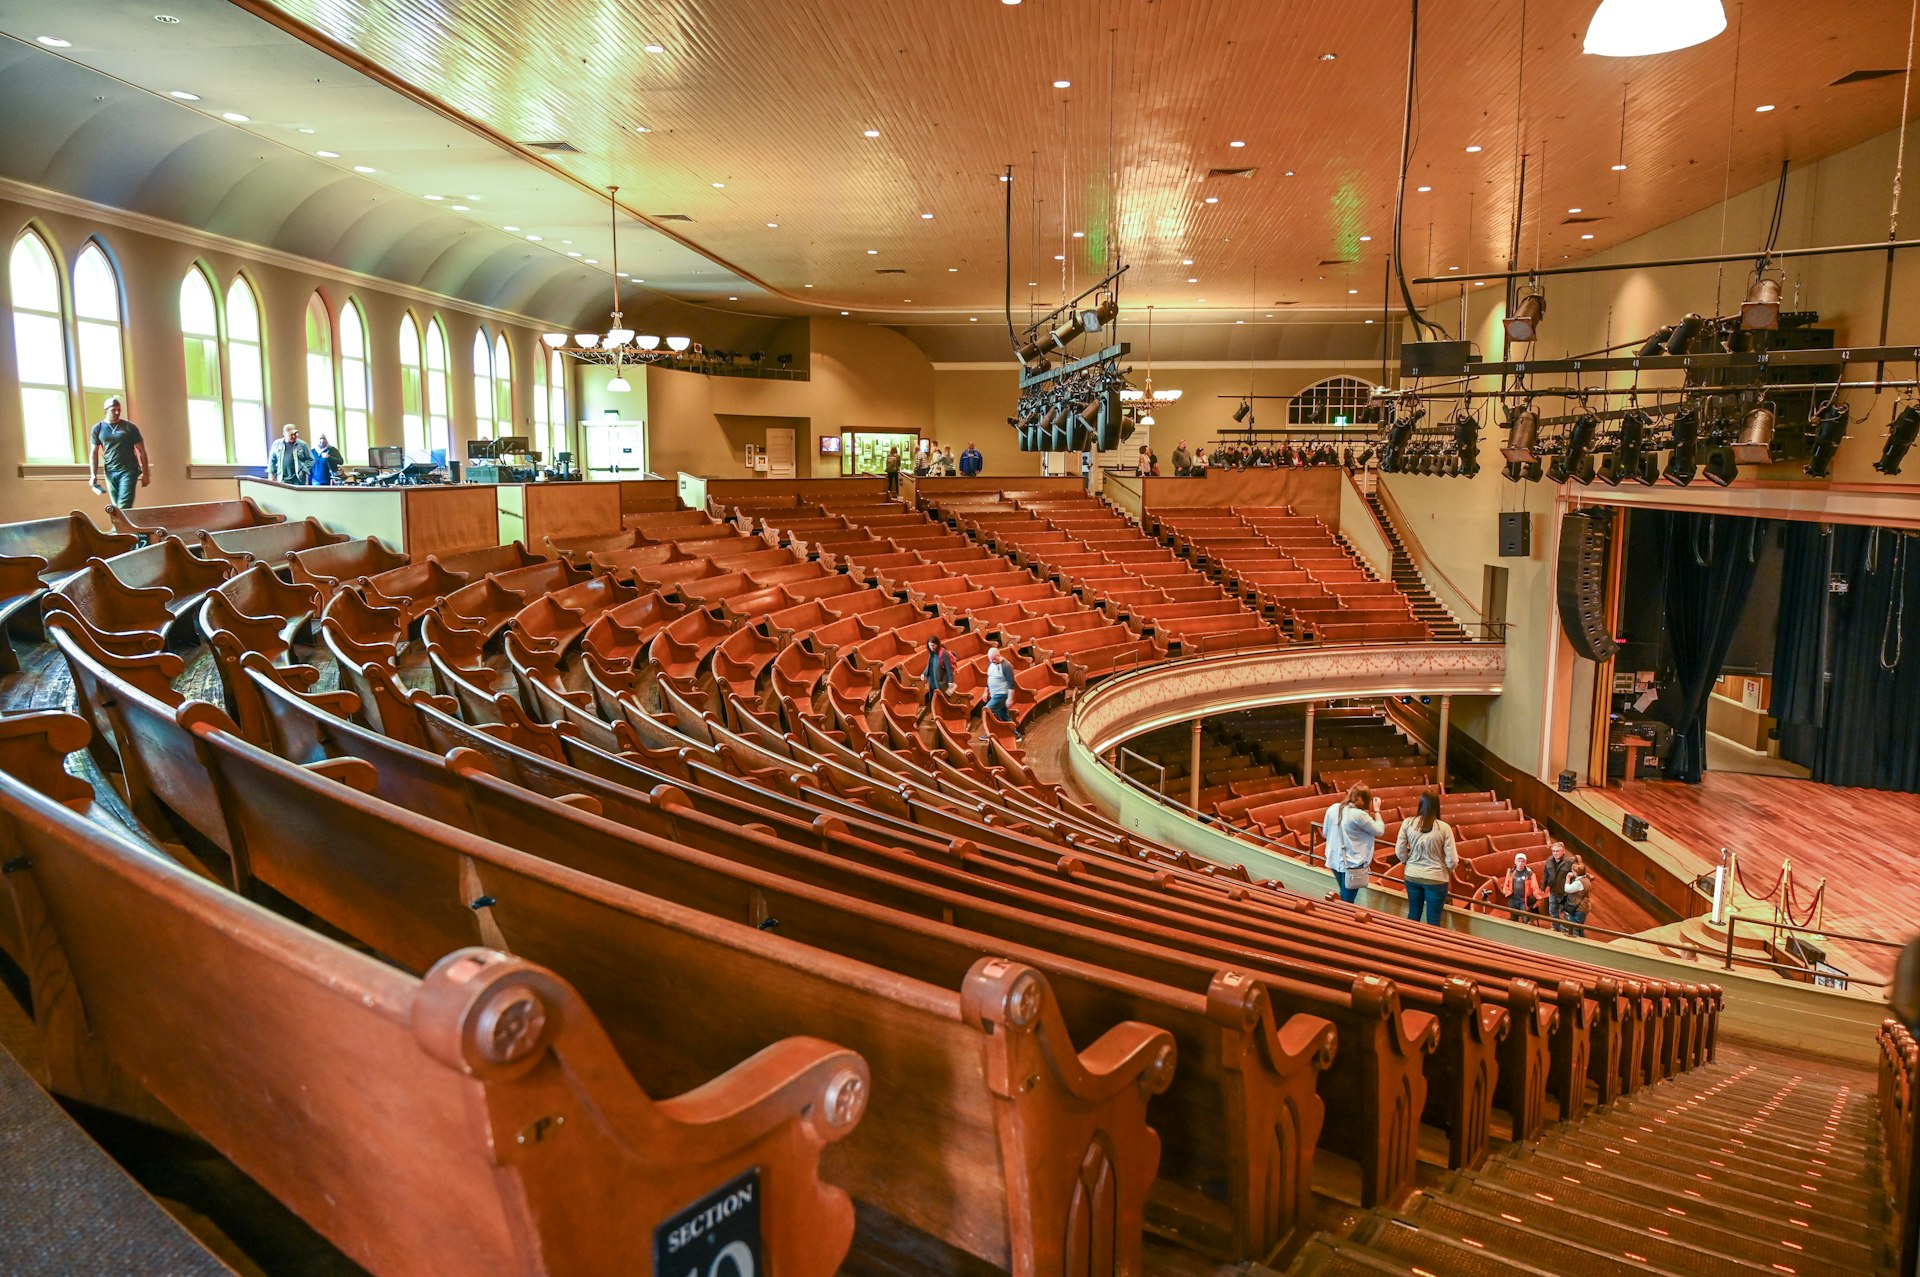 Interior of legendary Ryman Auditorium, seen from the back of the balcony looking out over rows of wooden seats and the stage 